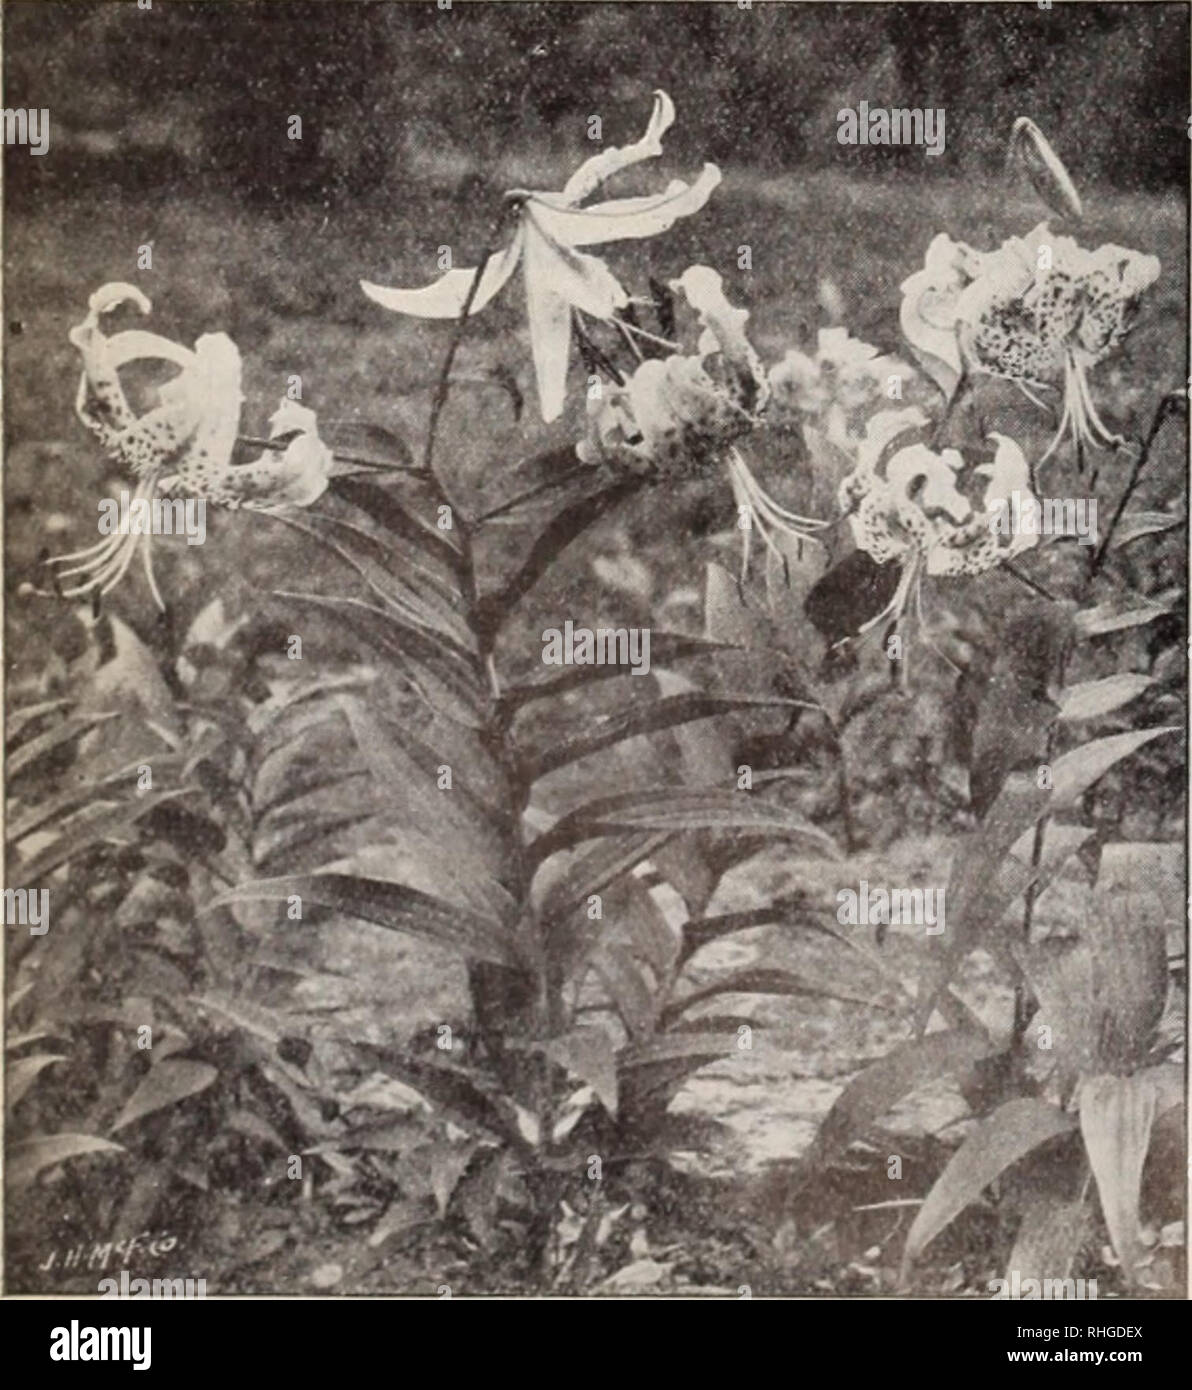 . Boddington's quality bulbs, seeds and plants / Arthur T. Boddington.. Nursery Catalogue. Lilium 8p«cio3um (type) Lilium auratum (type) LILIUM AURATUM PICTUM. A very choice Facli Doz. 100 type of Lilium auraliim ; pure white, with red and yellow bands through each petal. Large bulbs ...$o 30 $3 00 $20 00 LILIUM AURATUM PLATYPHYLLUM. A very strong and vigorous type of L. autalum. Flowers of immense size, pure ivory-white, with a deep golden band through each petal. Mammoth bulbs 50 4 00 30 00 Large bulbs 40 3 50 25 00 LILIUM AURATUM RUBRUM VITTATUM. A unique variety; flowers 10 to 12 inches ac Stock Photo